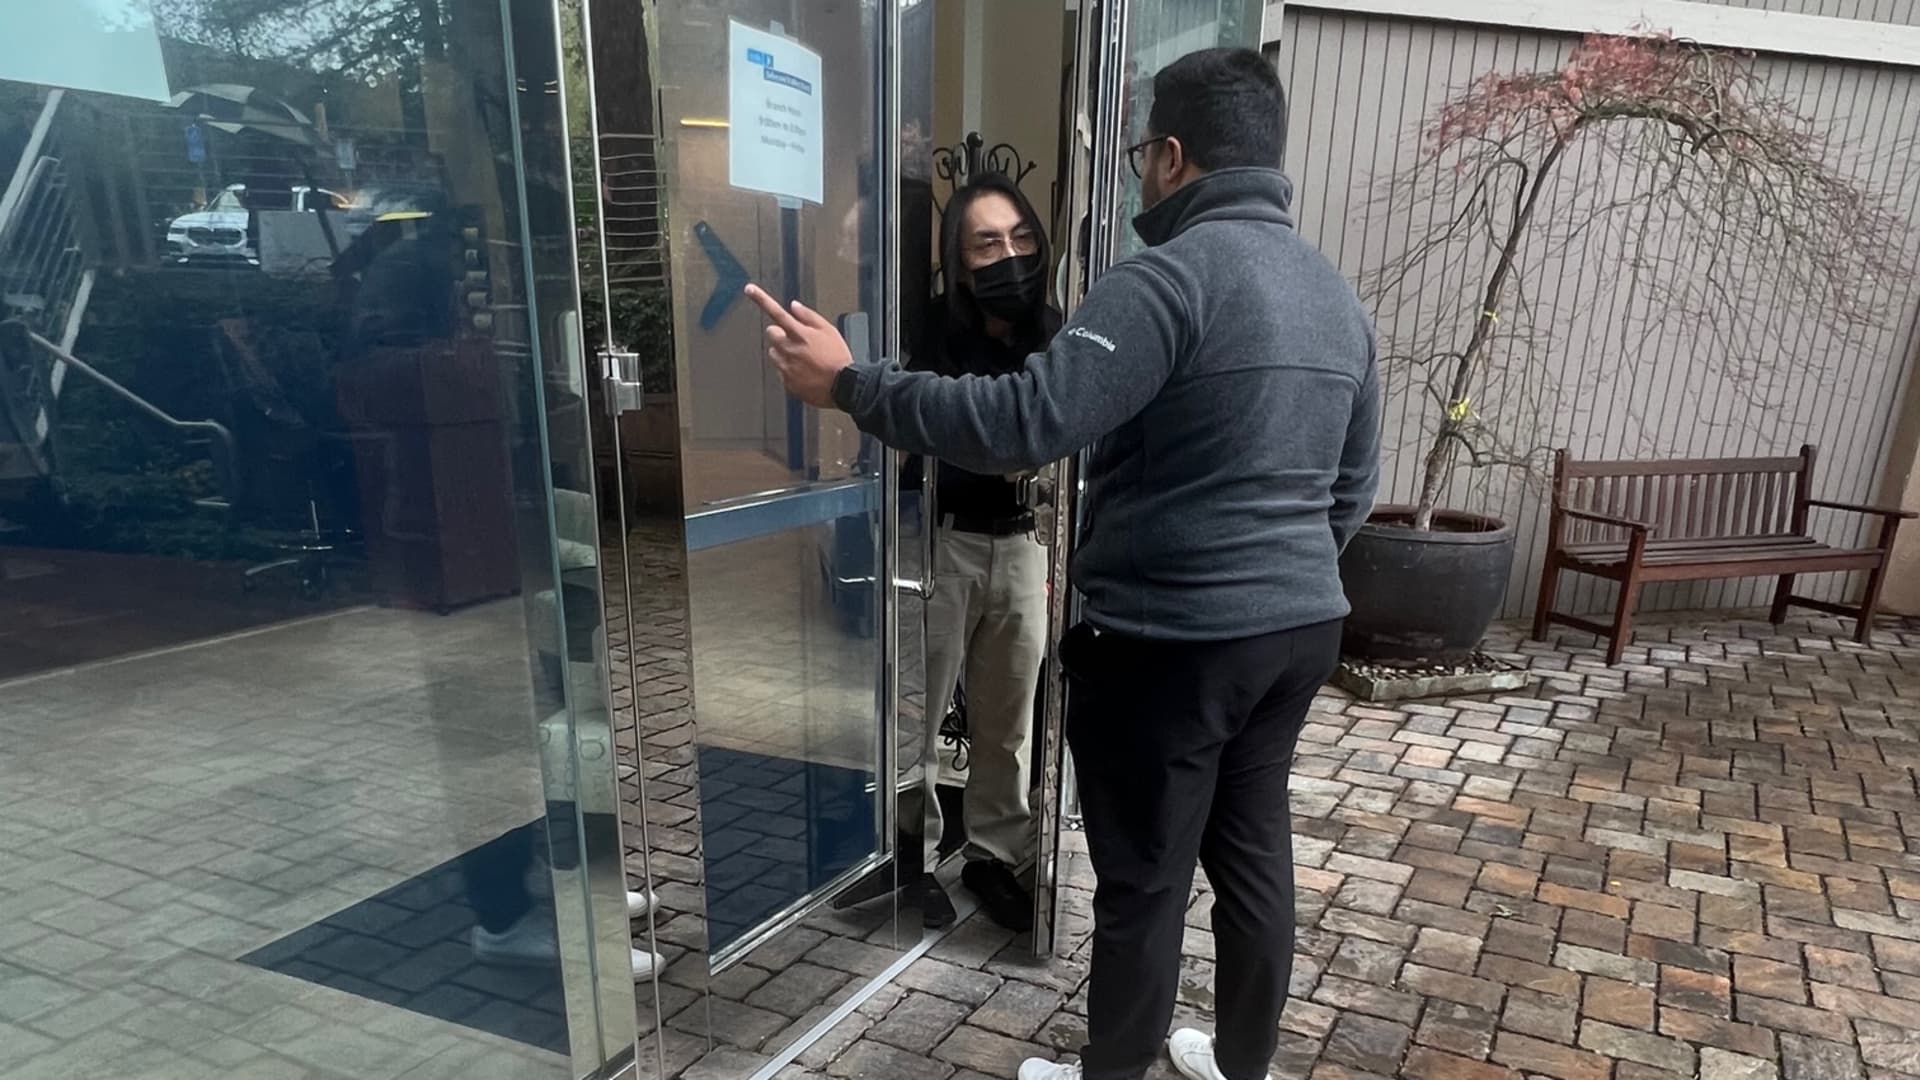 SVB clients knocked on the locked entrance doors of the Menlo Park office in hopes of getting the attention of a security guard or representative.